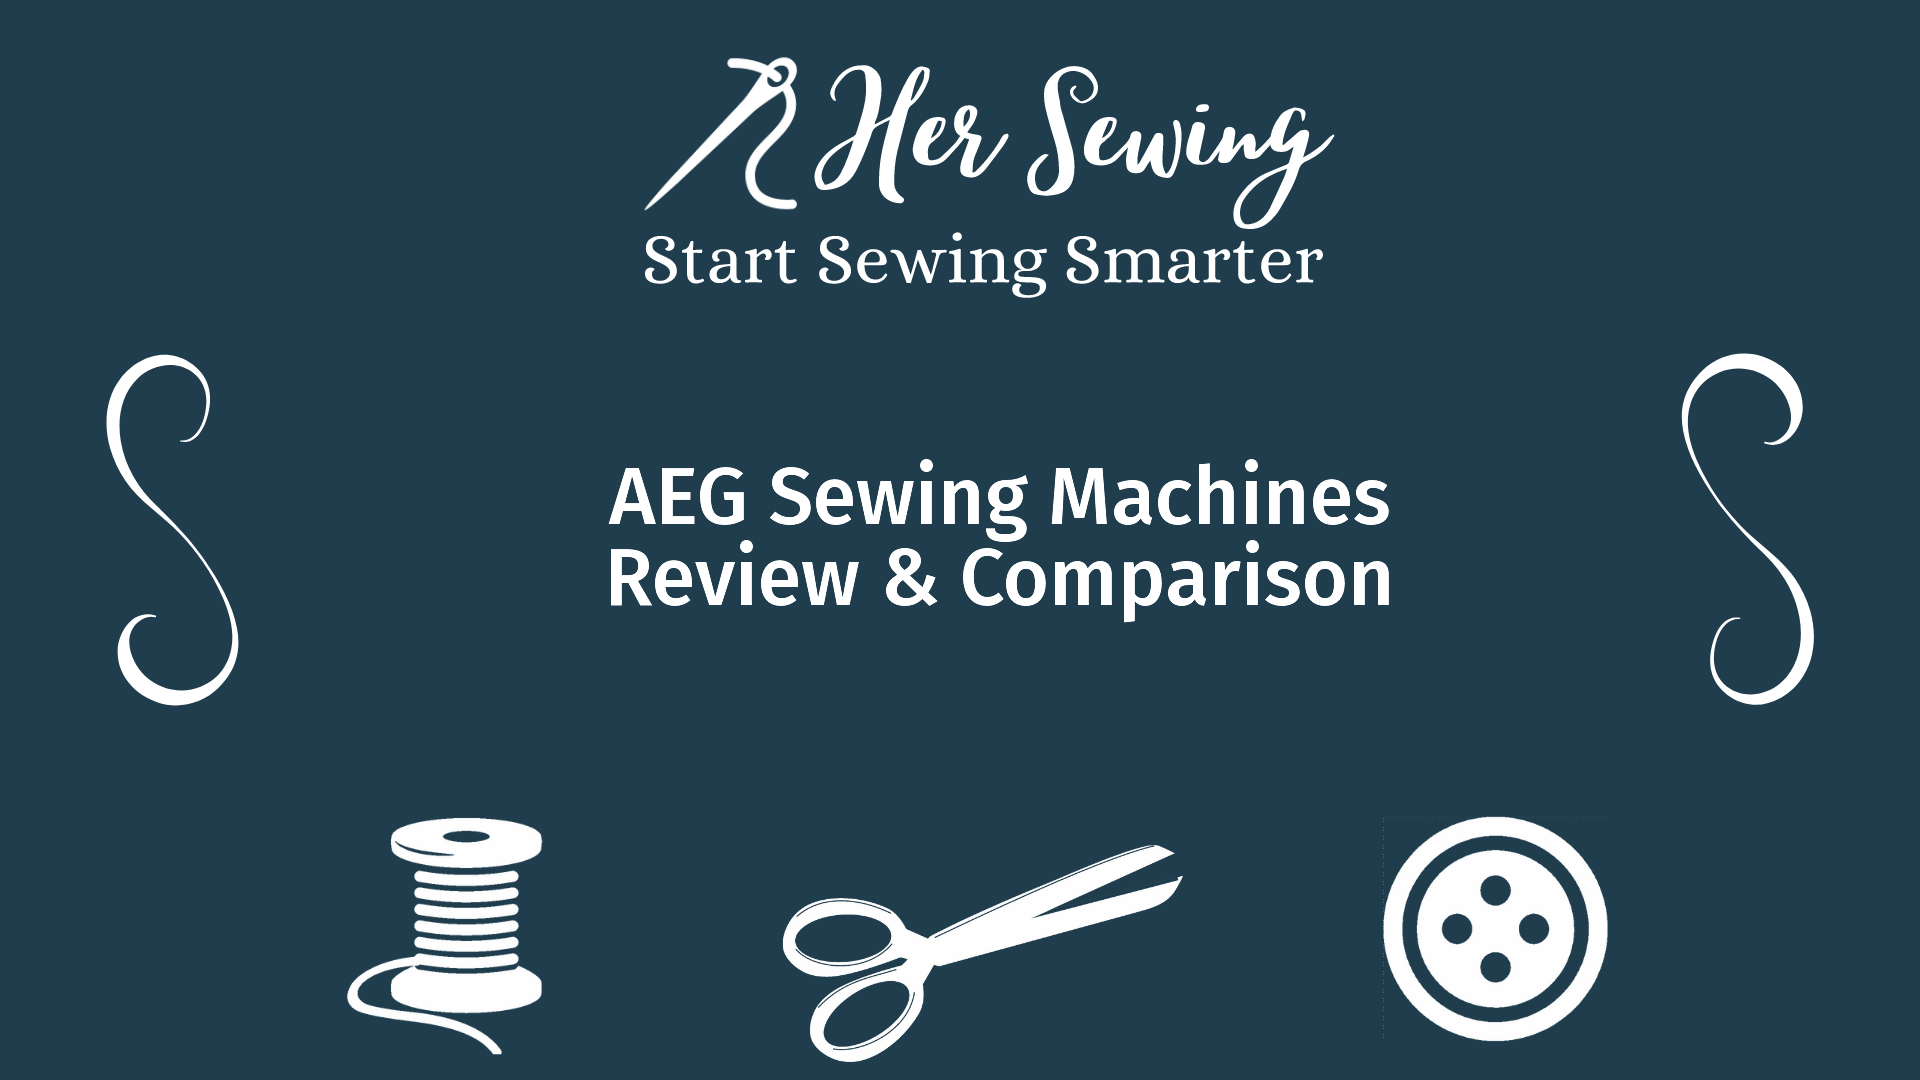 AEG Sewing Machines Review & Comparison